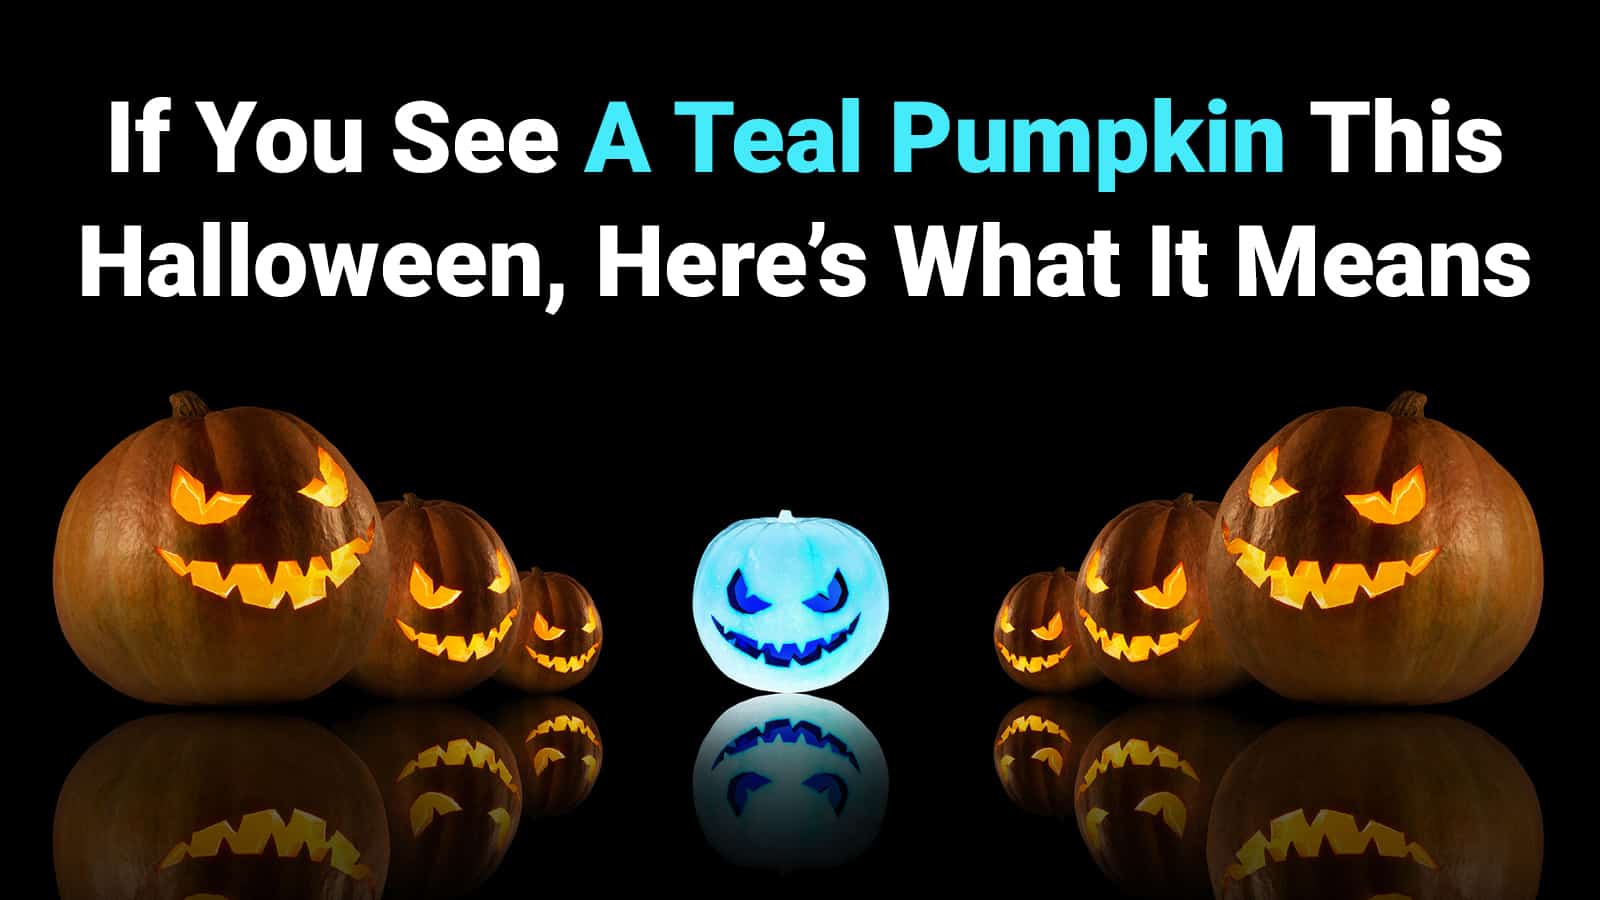 If You See A Teal Pumpkin This Halloween, Here’s What It Means